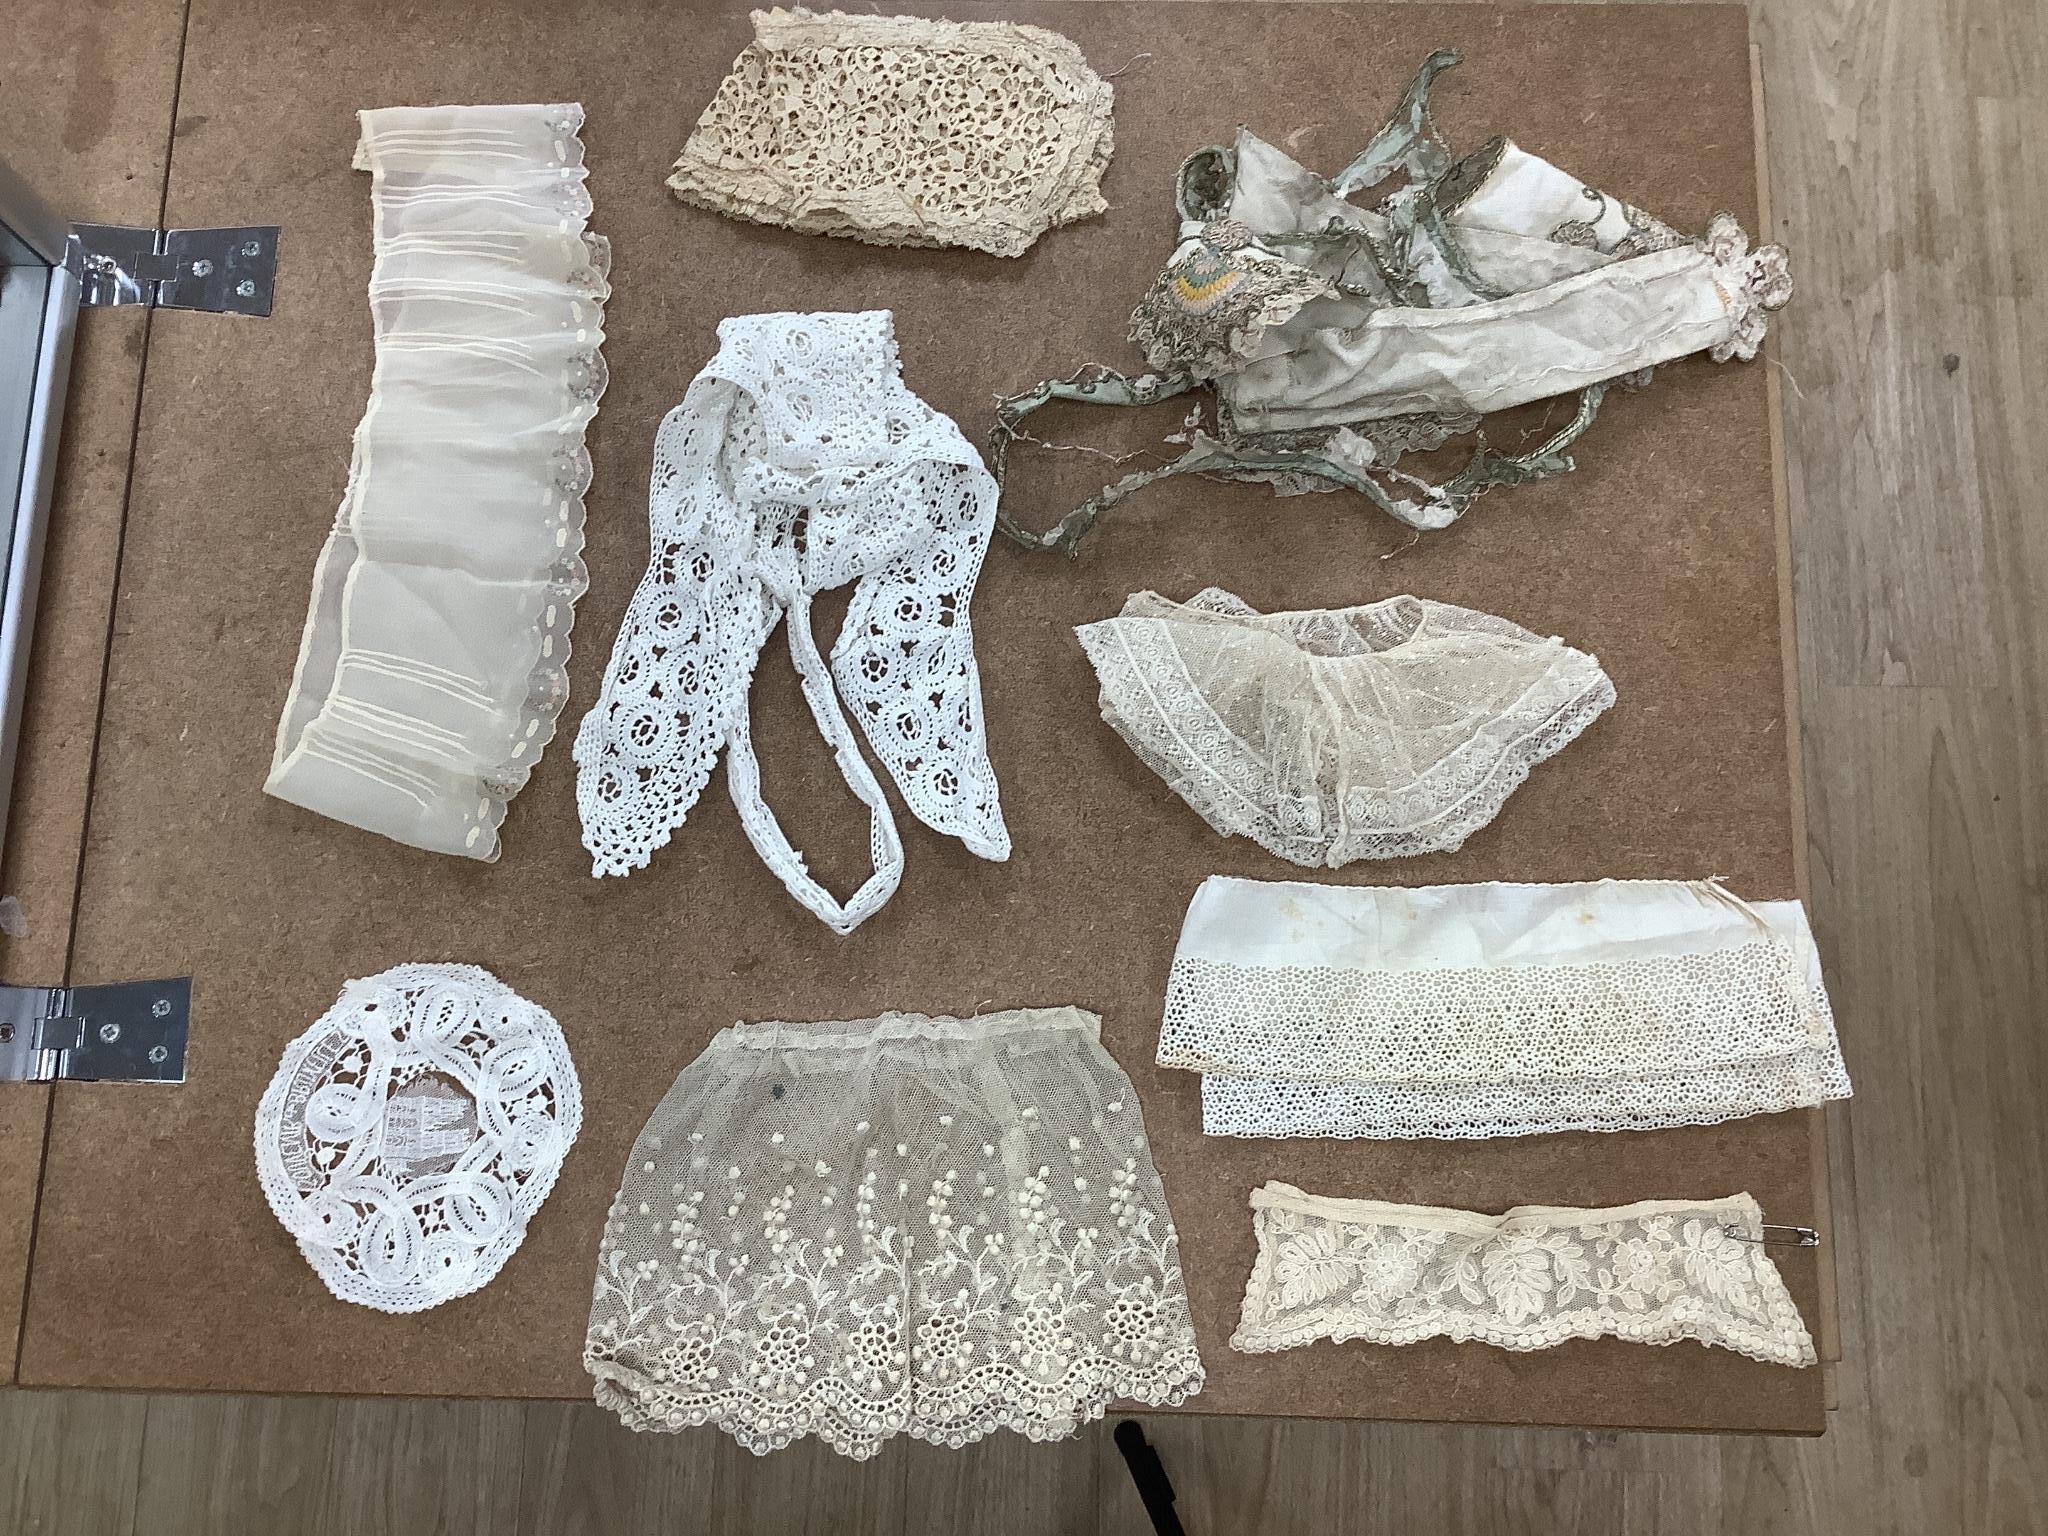 A collection of lace collars and trimmings